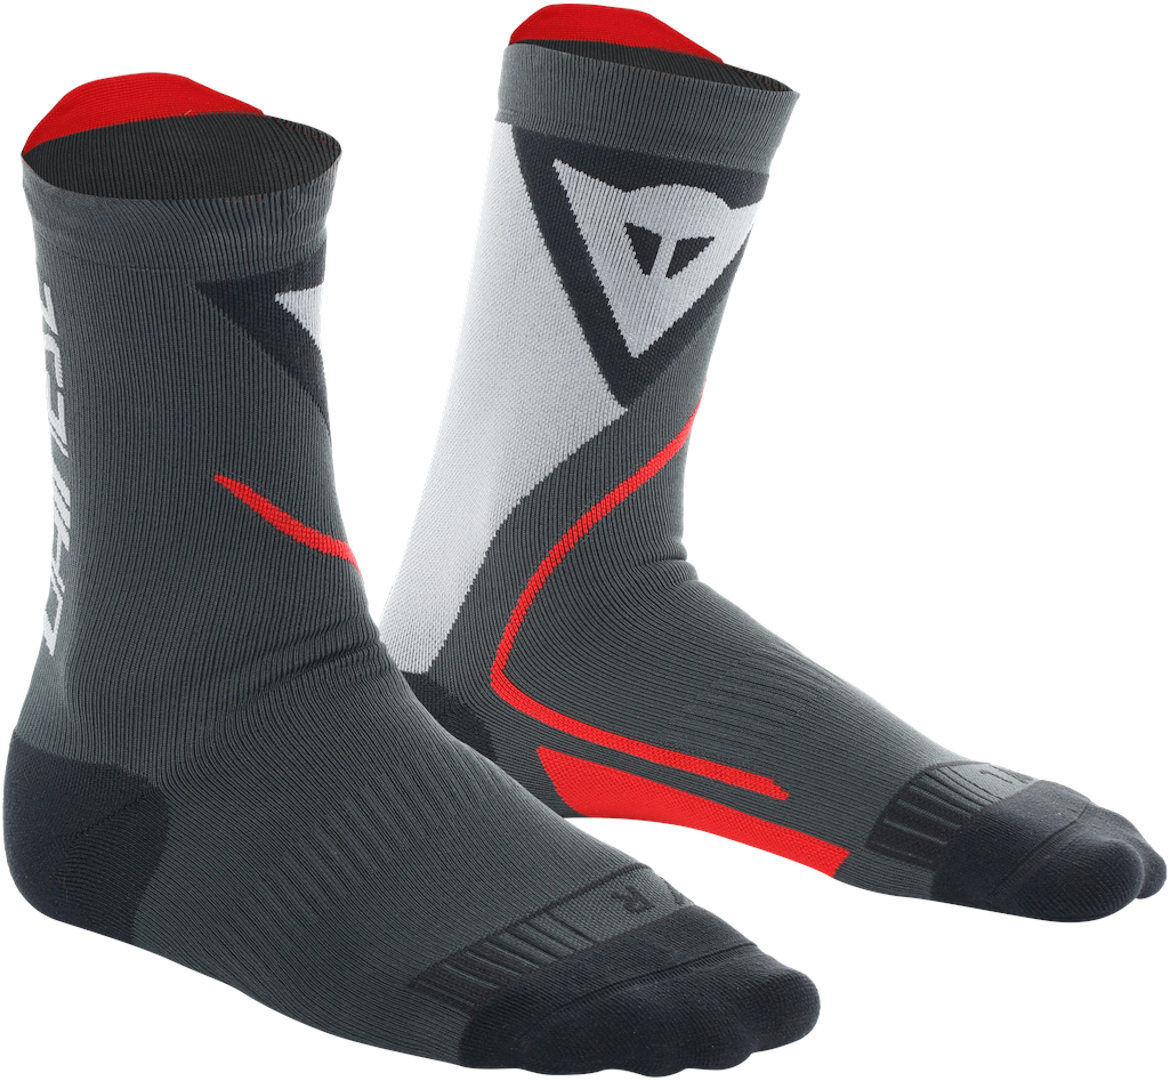 Dainese Thermo Mid Calcetines - Negro Gris Rojo (36 37 38)